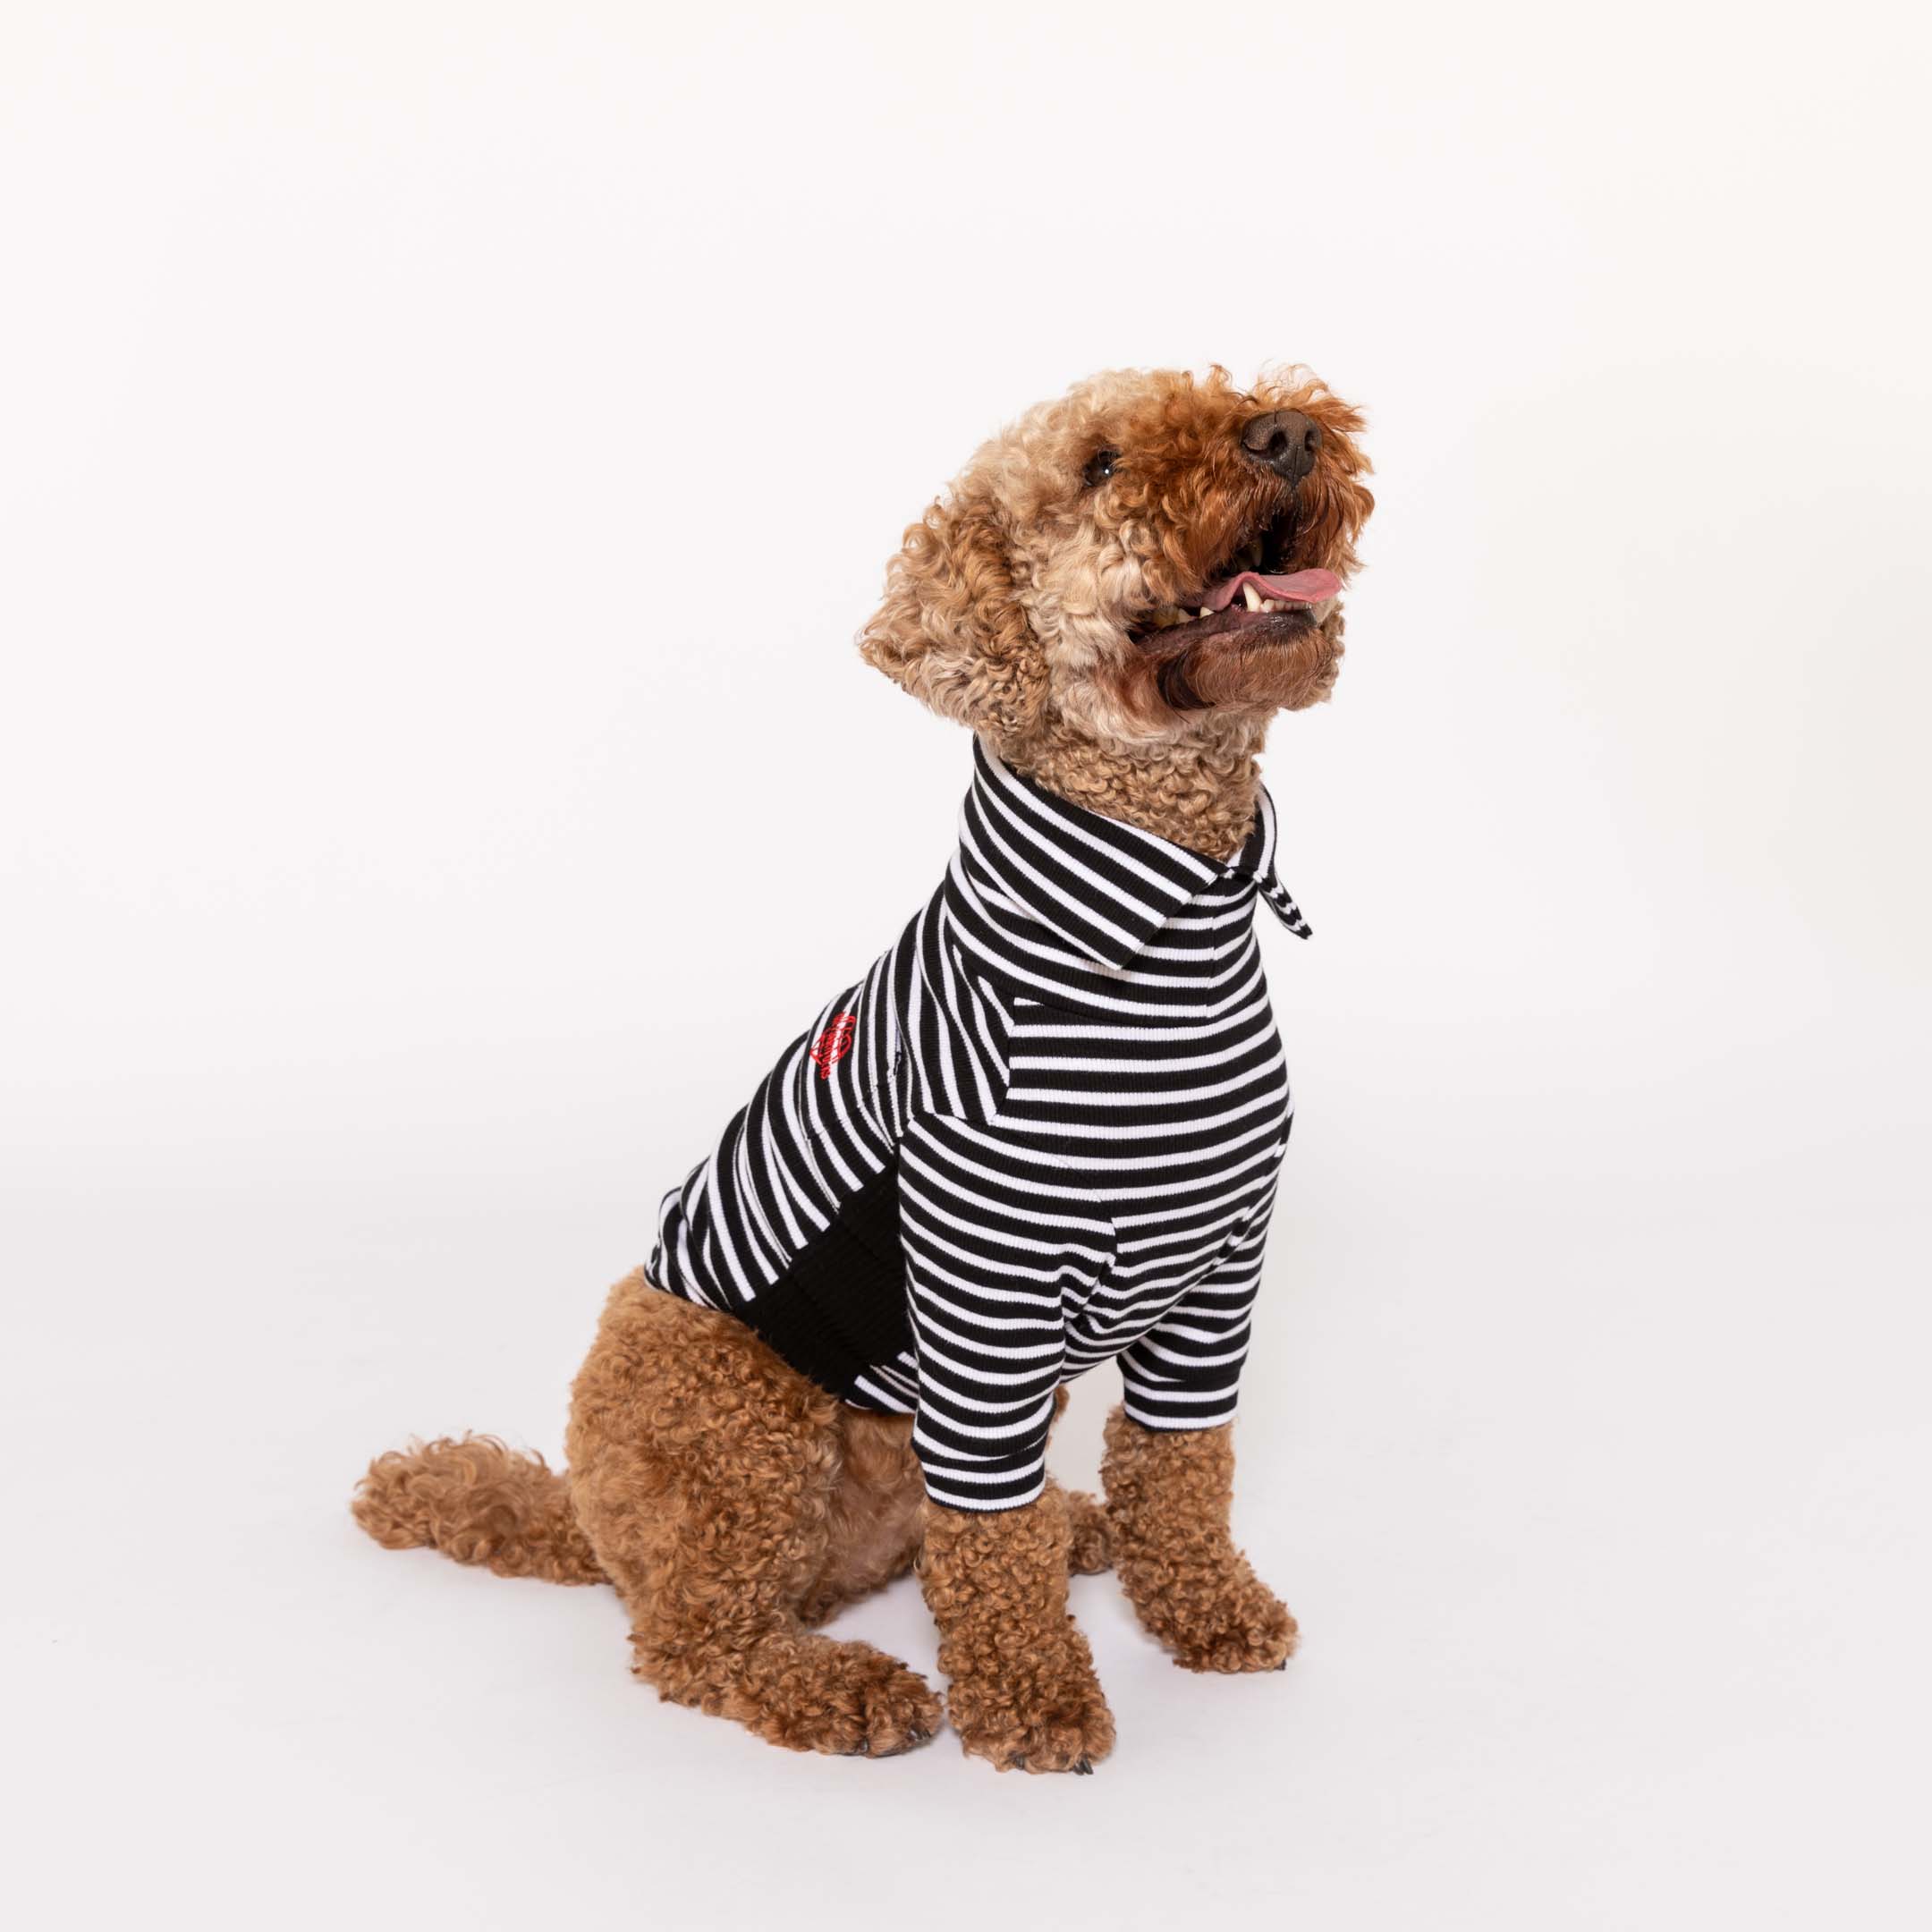 Happy Poodle in a black and white striped shirt with emblem, perfect for trendy dog apparel.